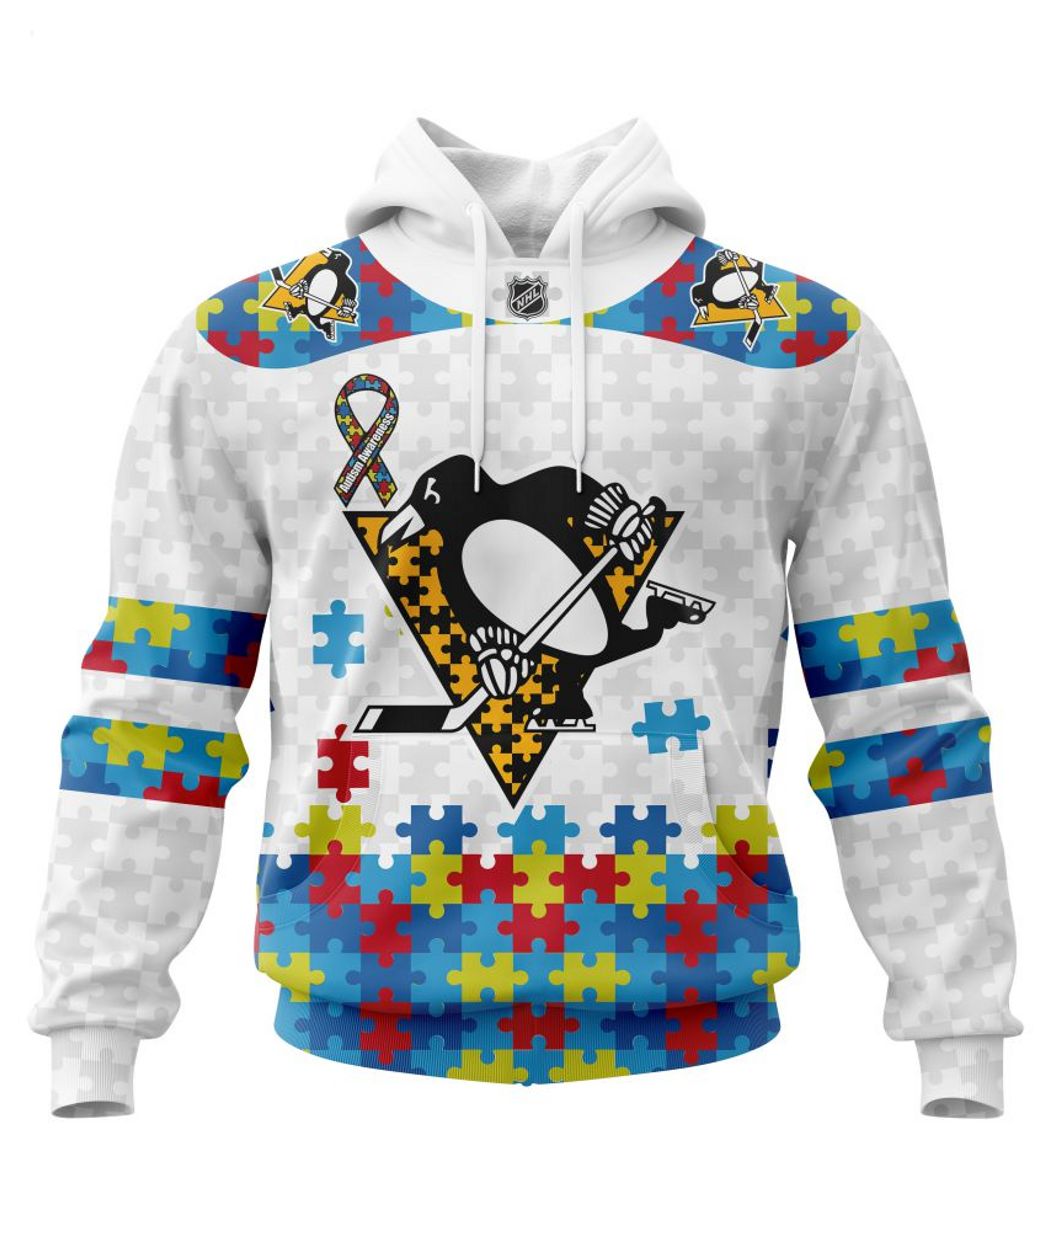 NHL Pittsburgh Penguins Star Wars Personalized 3D Hoodie, Shirt